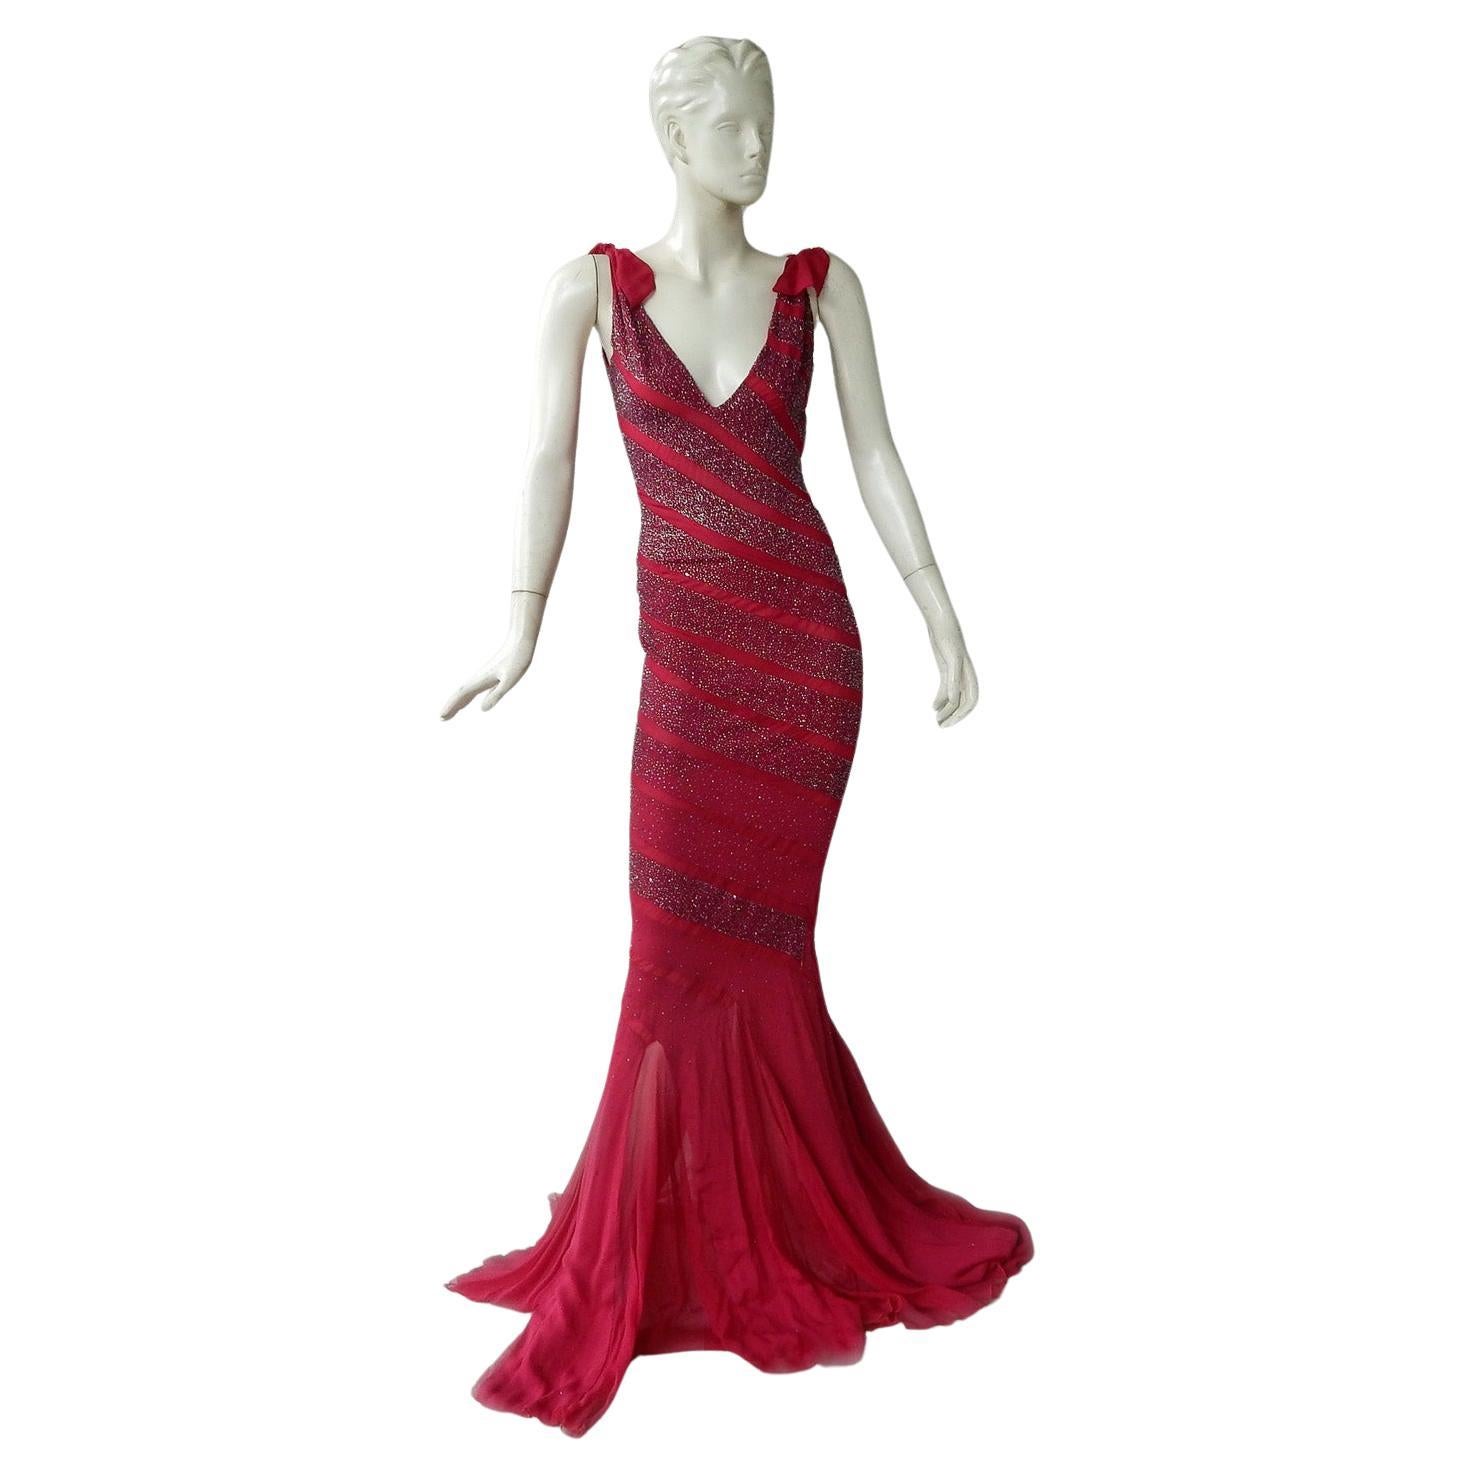 Gucci Vintage Beaded Evening Dress Gown   NWT For Sale